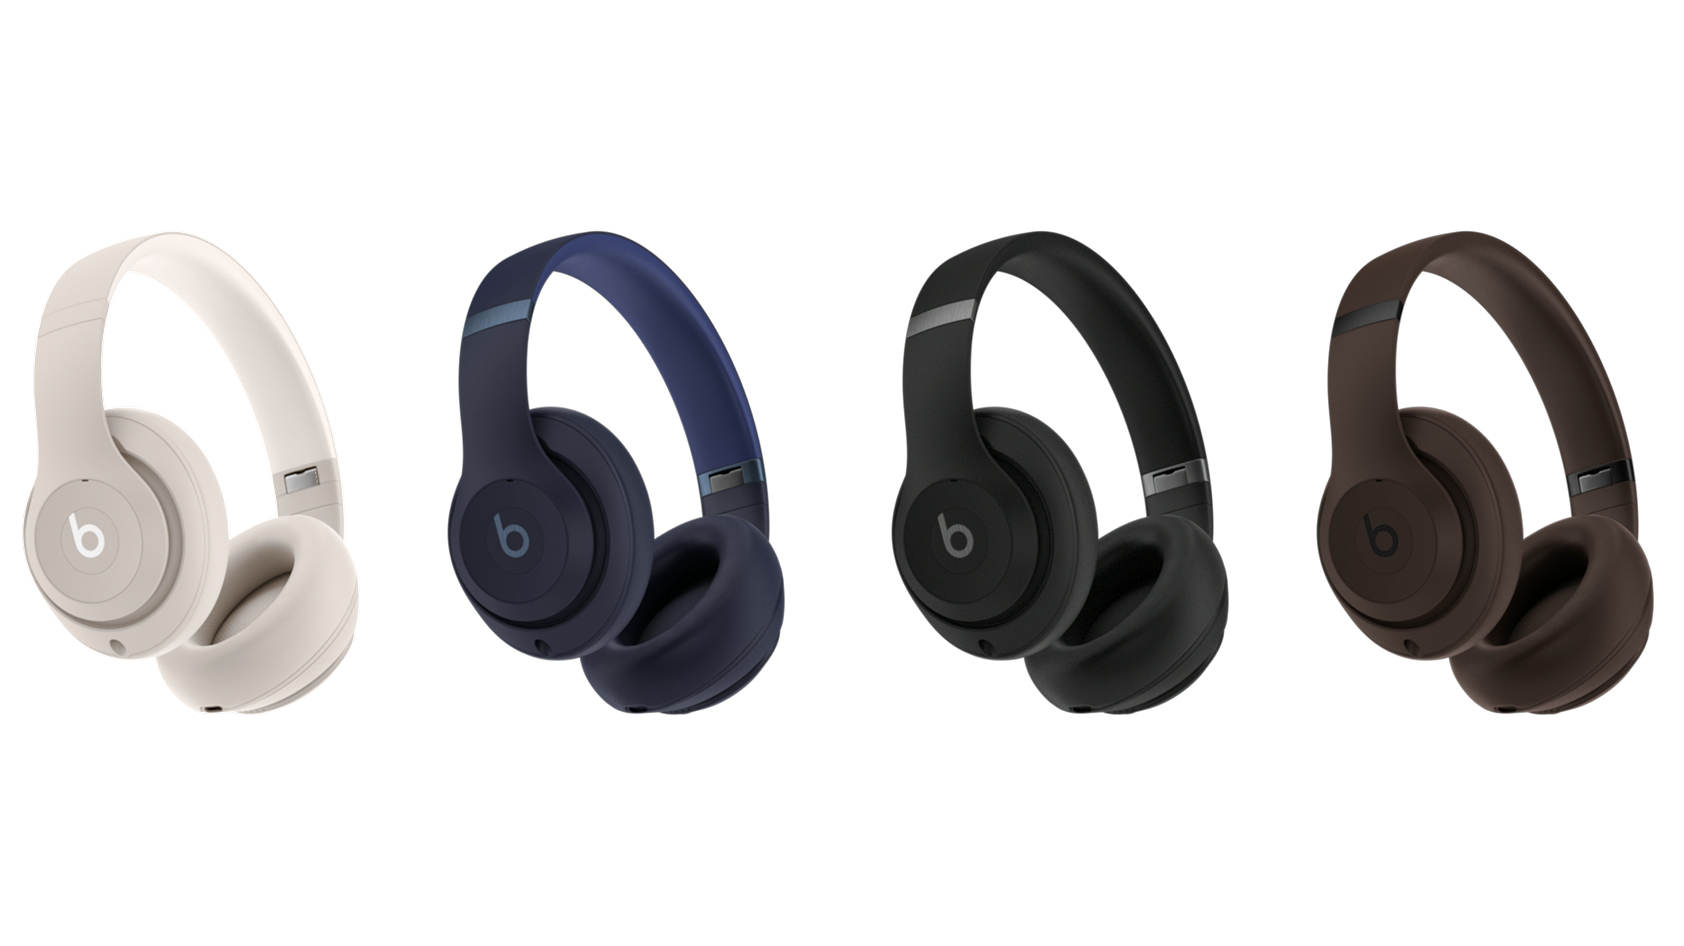 Renders of the Beats Studio Pro in ivory, navy, black, and brown.